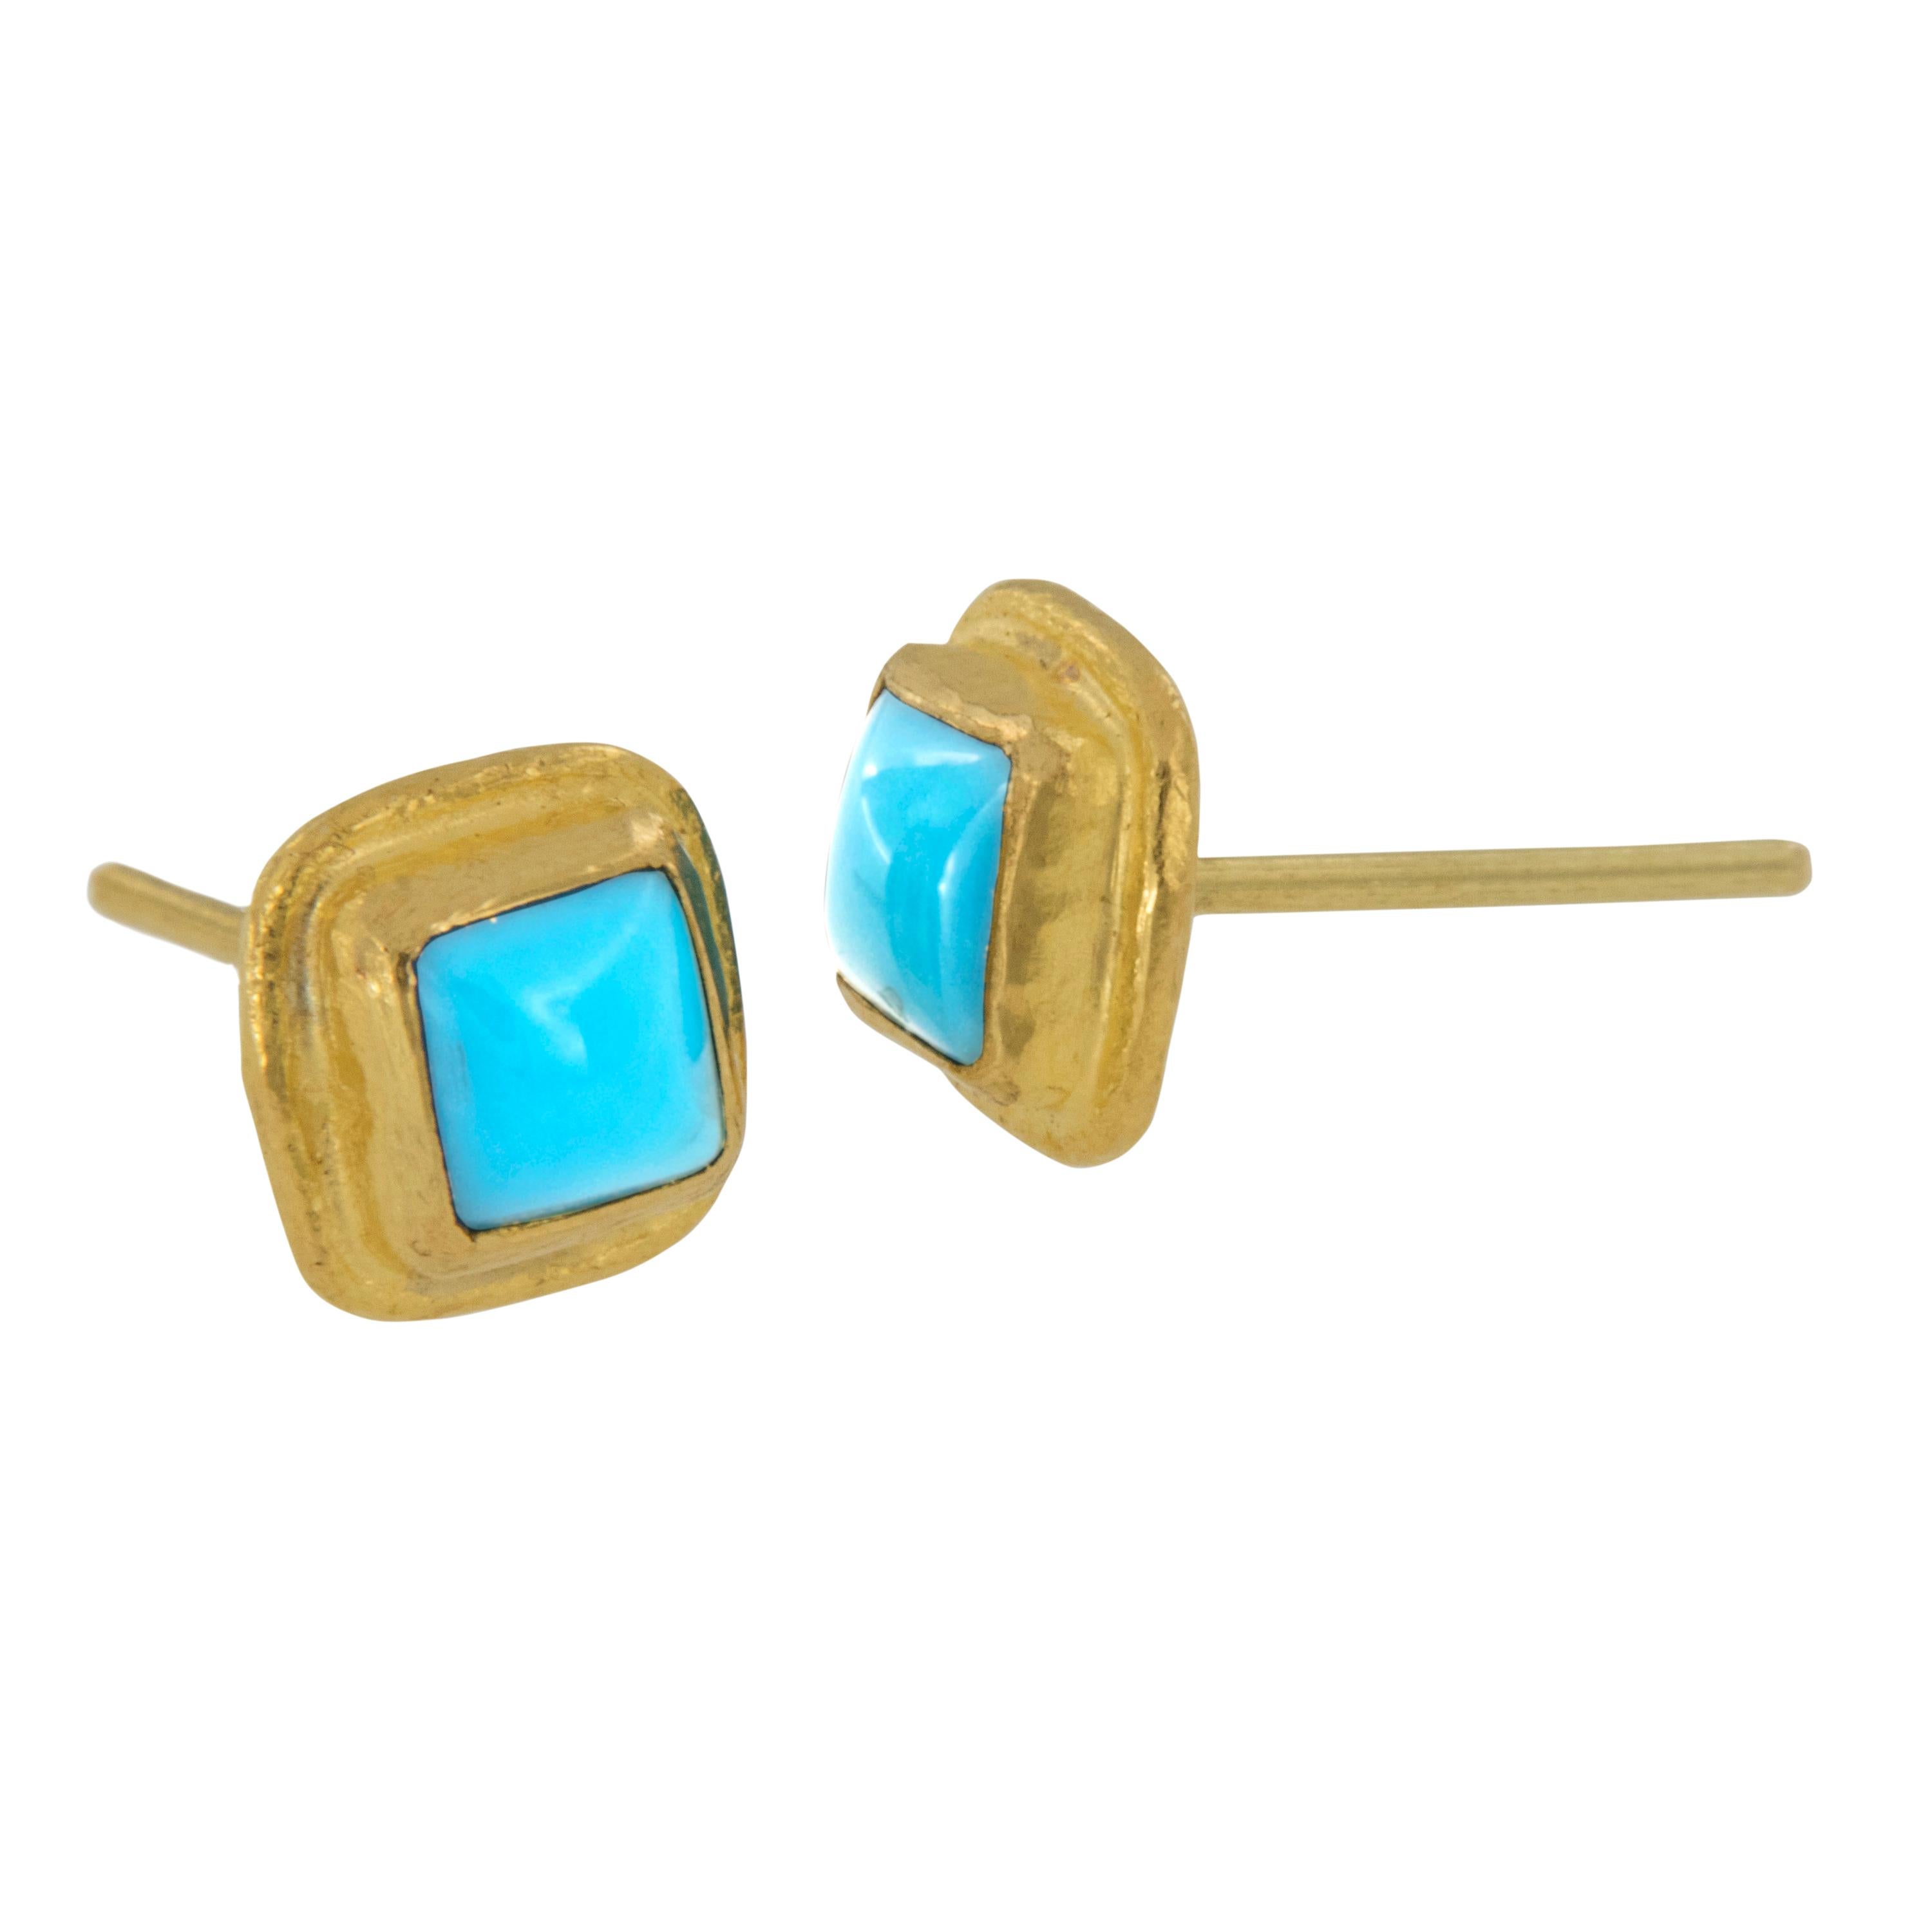 Nothing is more luxurious than pure 24 karat gold! It has such a warm, sunshine reminiscent color. Own these adorable turquoise earrings & bring some of that beautiful sunshine to your life! These Persian turquoise pieces (1.17 Cttw) have the rich